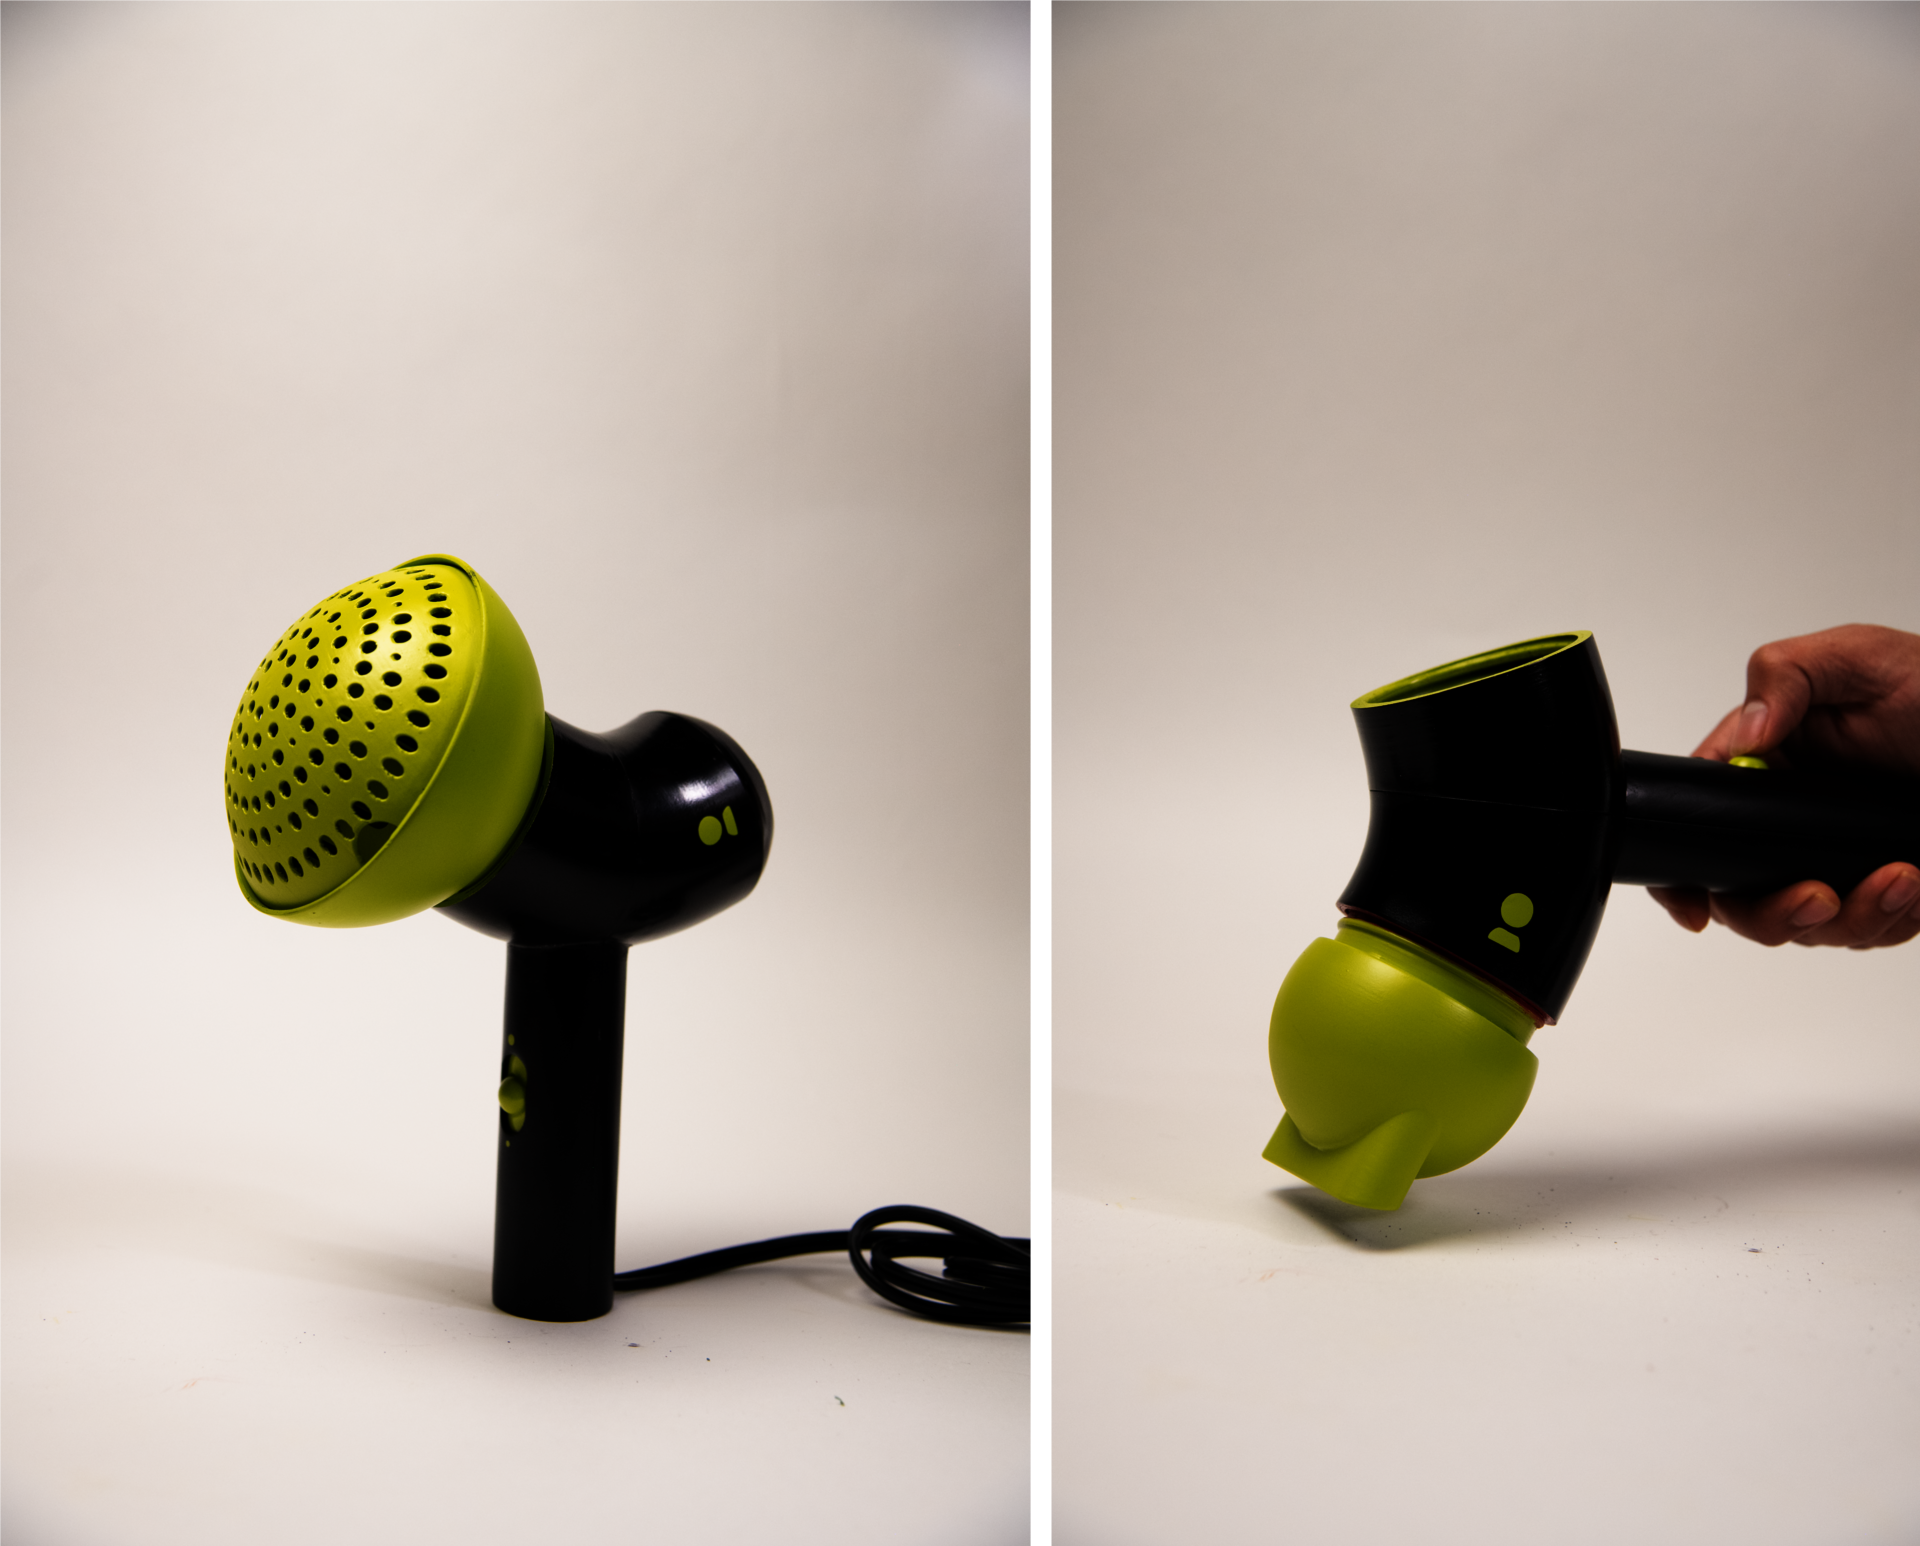 Black body hairdryer with chartreuse green screws in the front. Around the hairdryer are other attachments such as a hairdryer nozzle(chartreuse green), diffuser(chartreuse green), fabric shaver(bright pink) and clothes steamer(bright pink) placed on a white backdrop.